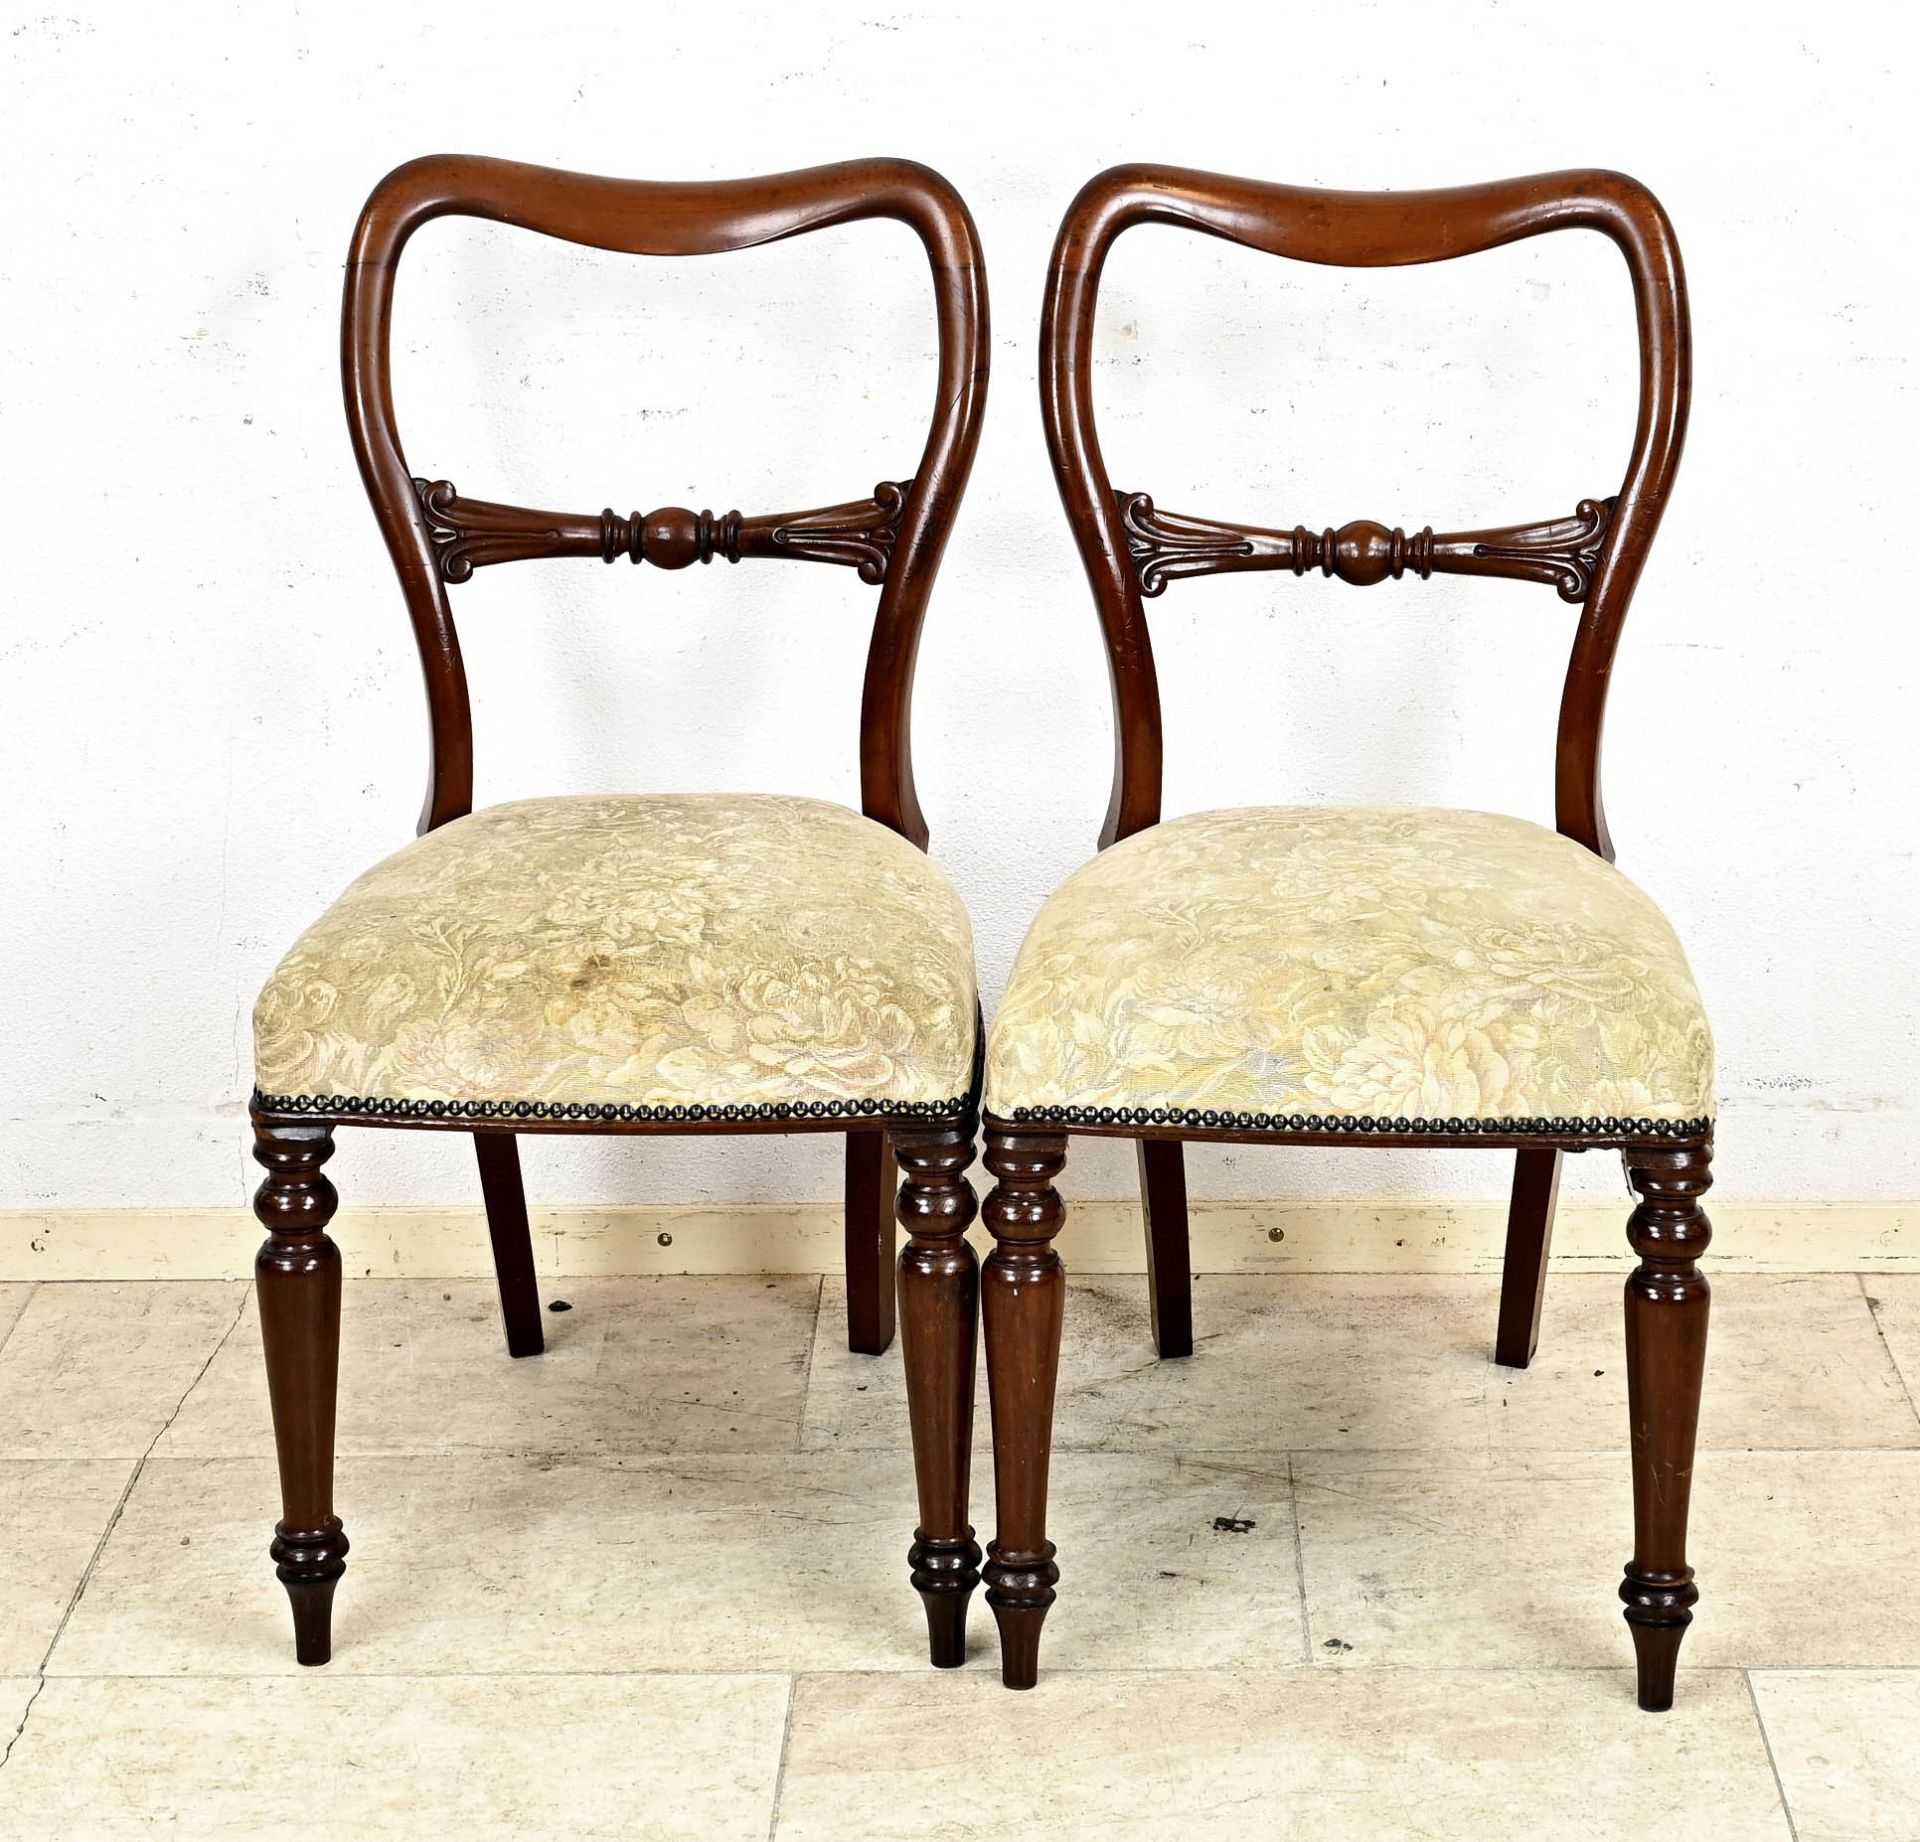 Set of 4 chairs, England around 1860, mahogany, 88 x 45 x 50 cm - This furniture cannot be viewed on